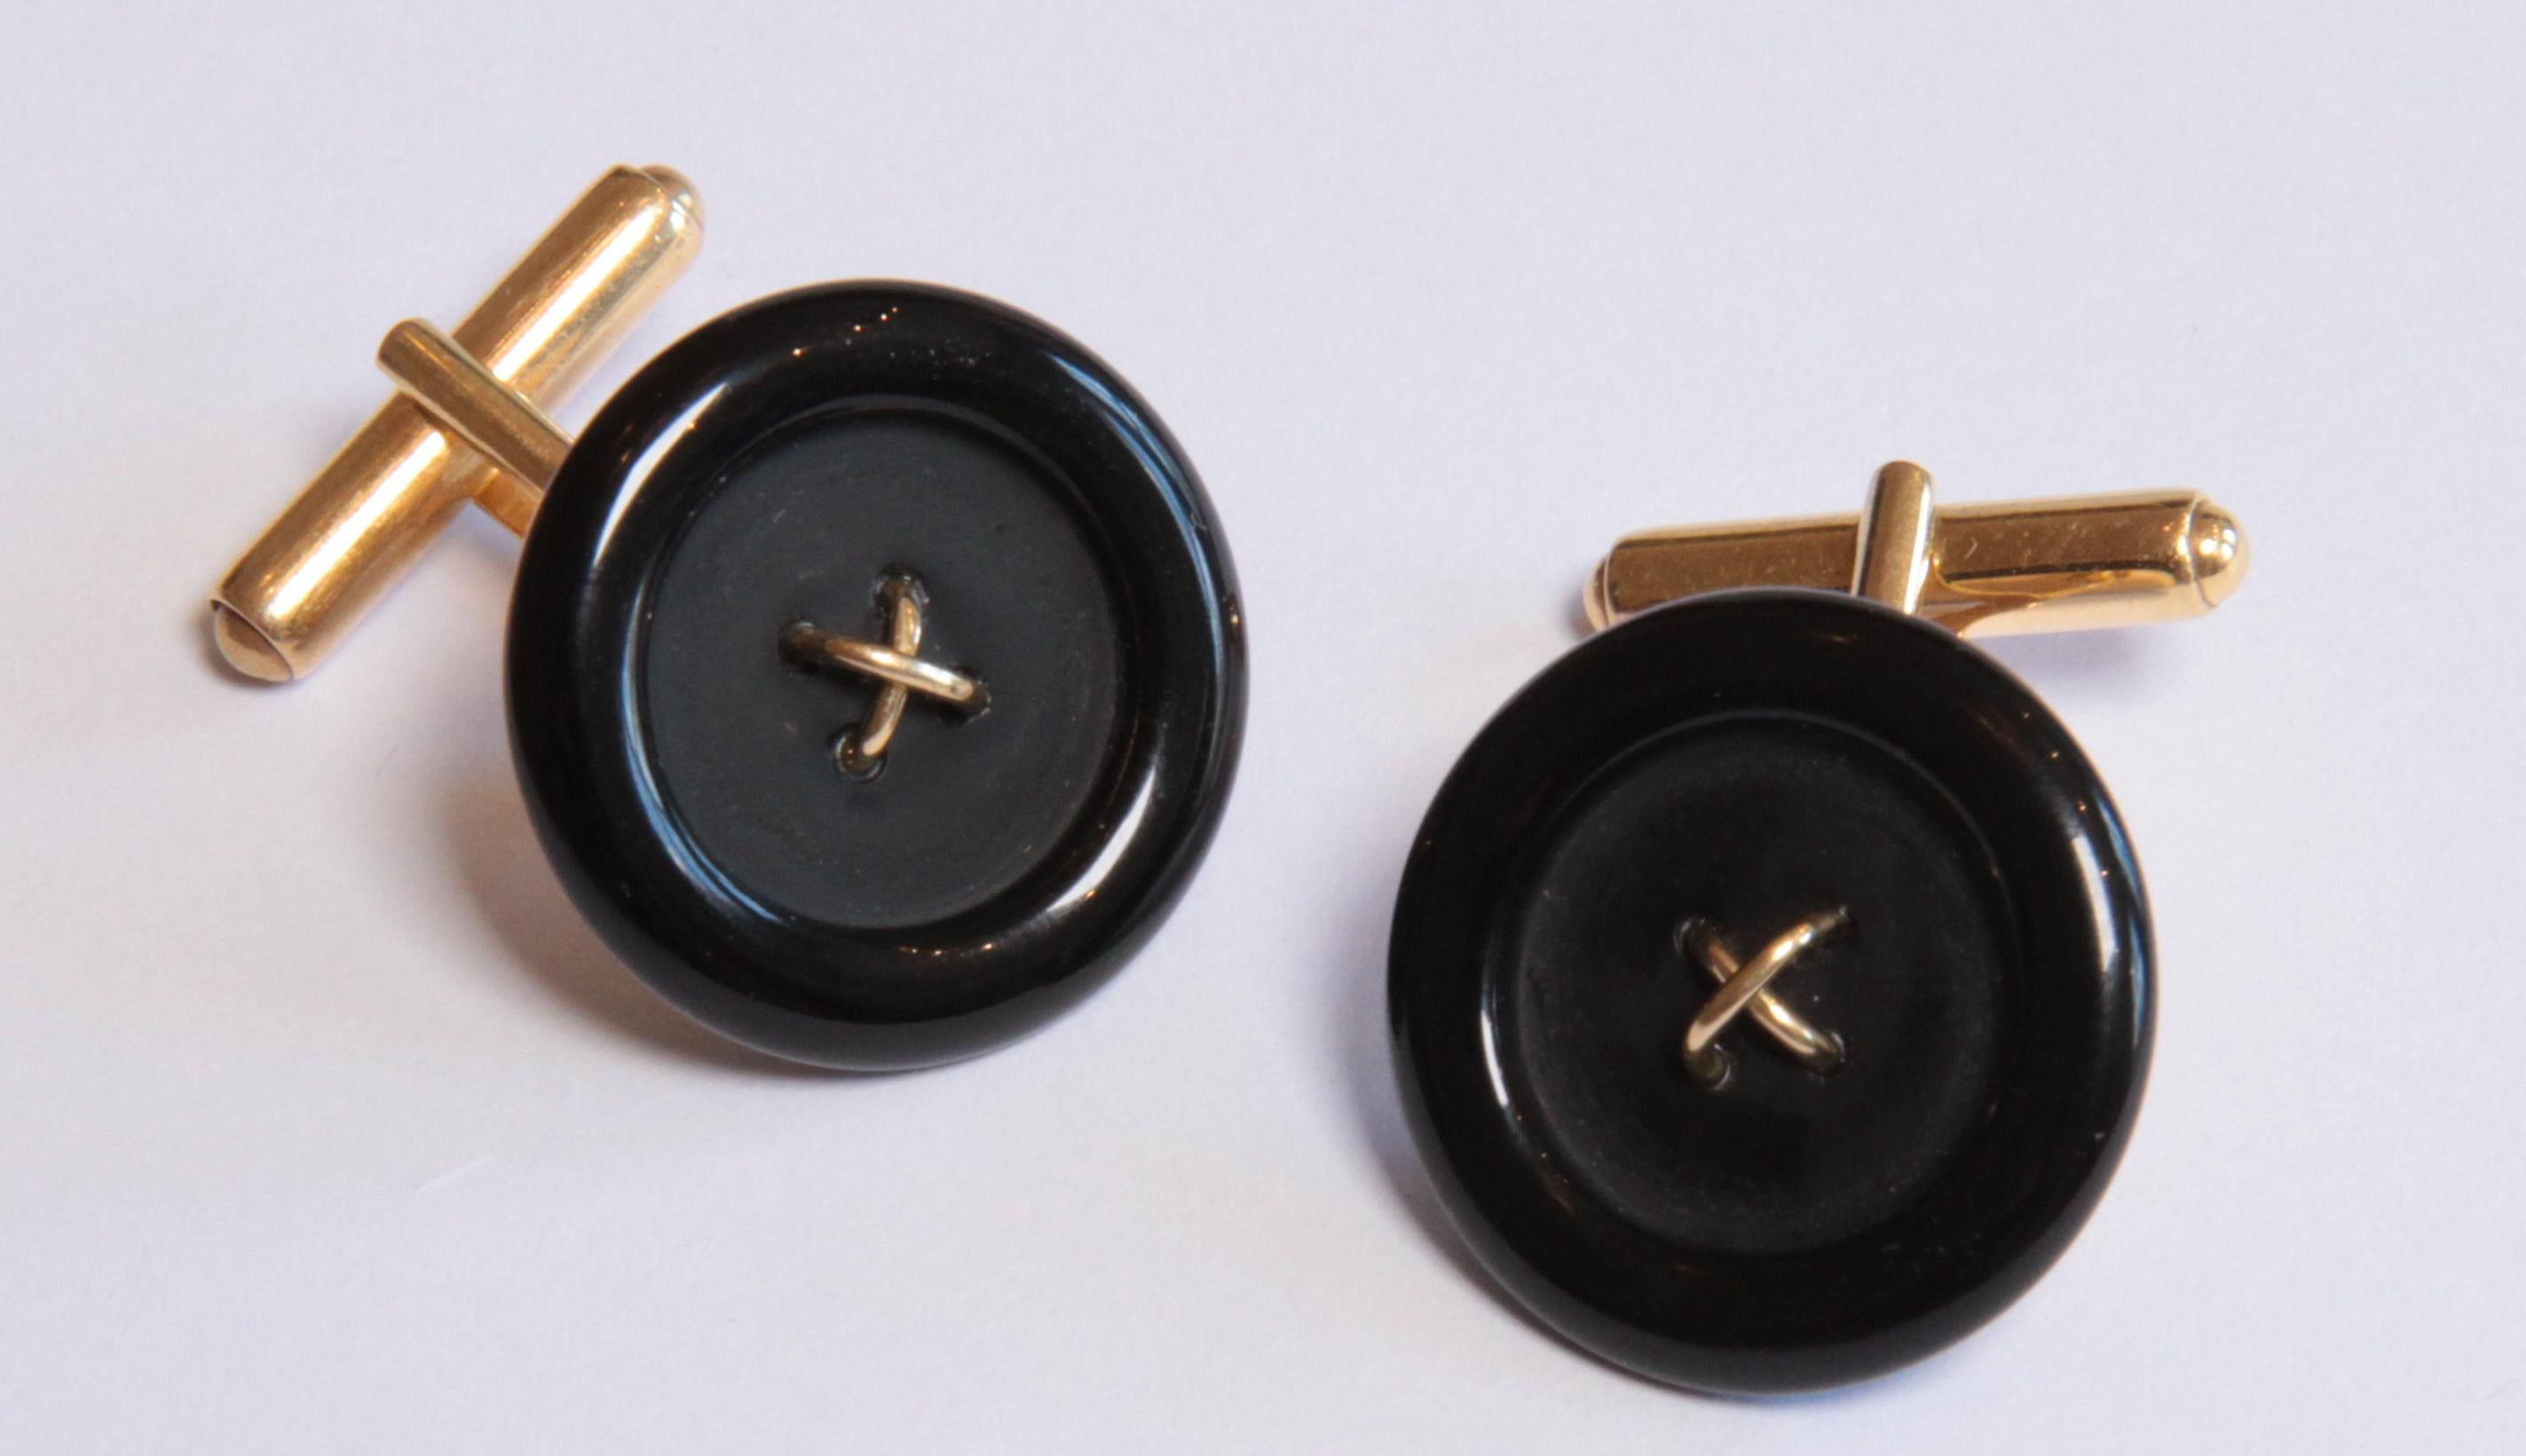 Europe, around 1930's. Pair of onyx cufflinks mounted in 18 carat yellow gold.
Hallmarked with the purity 750, MECAN. Total weight: 10,82 grams. 
Diameter: 0.79 in ( 2 cm )